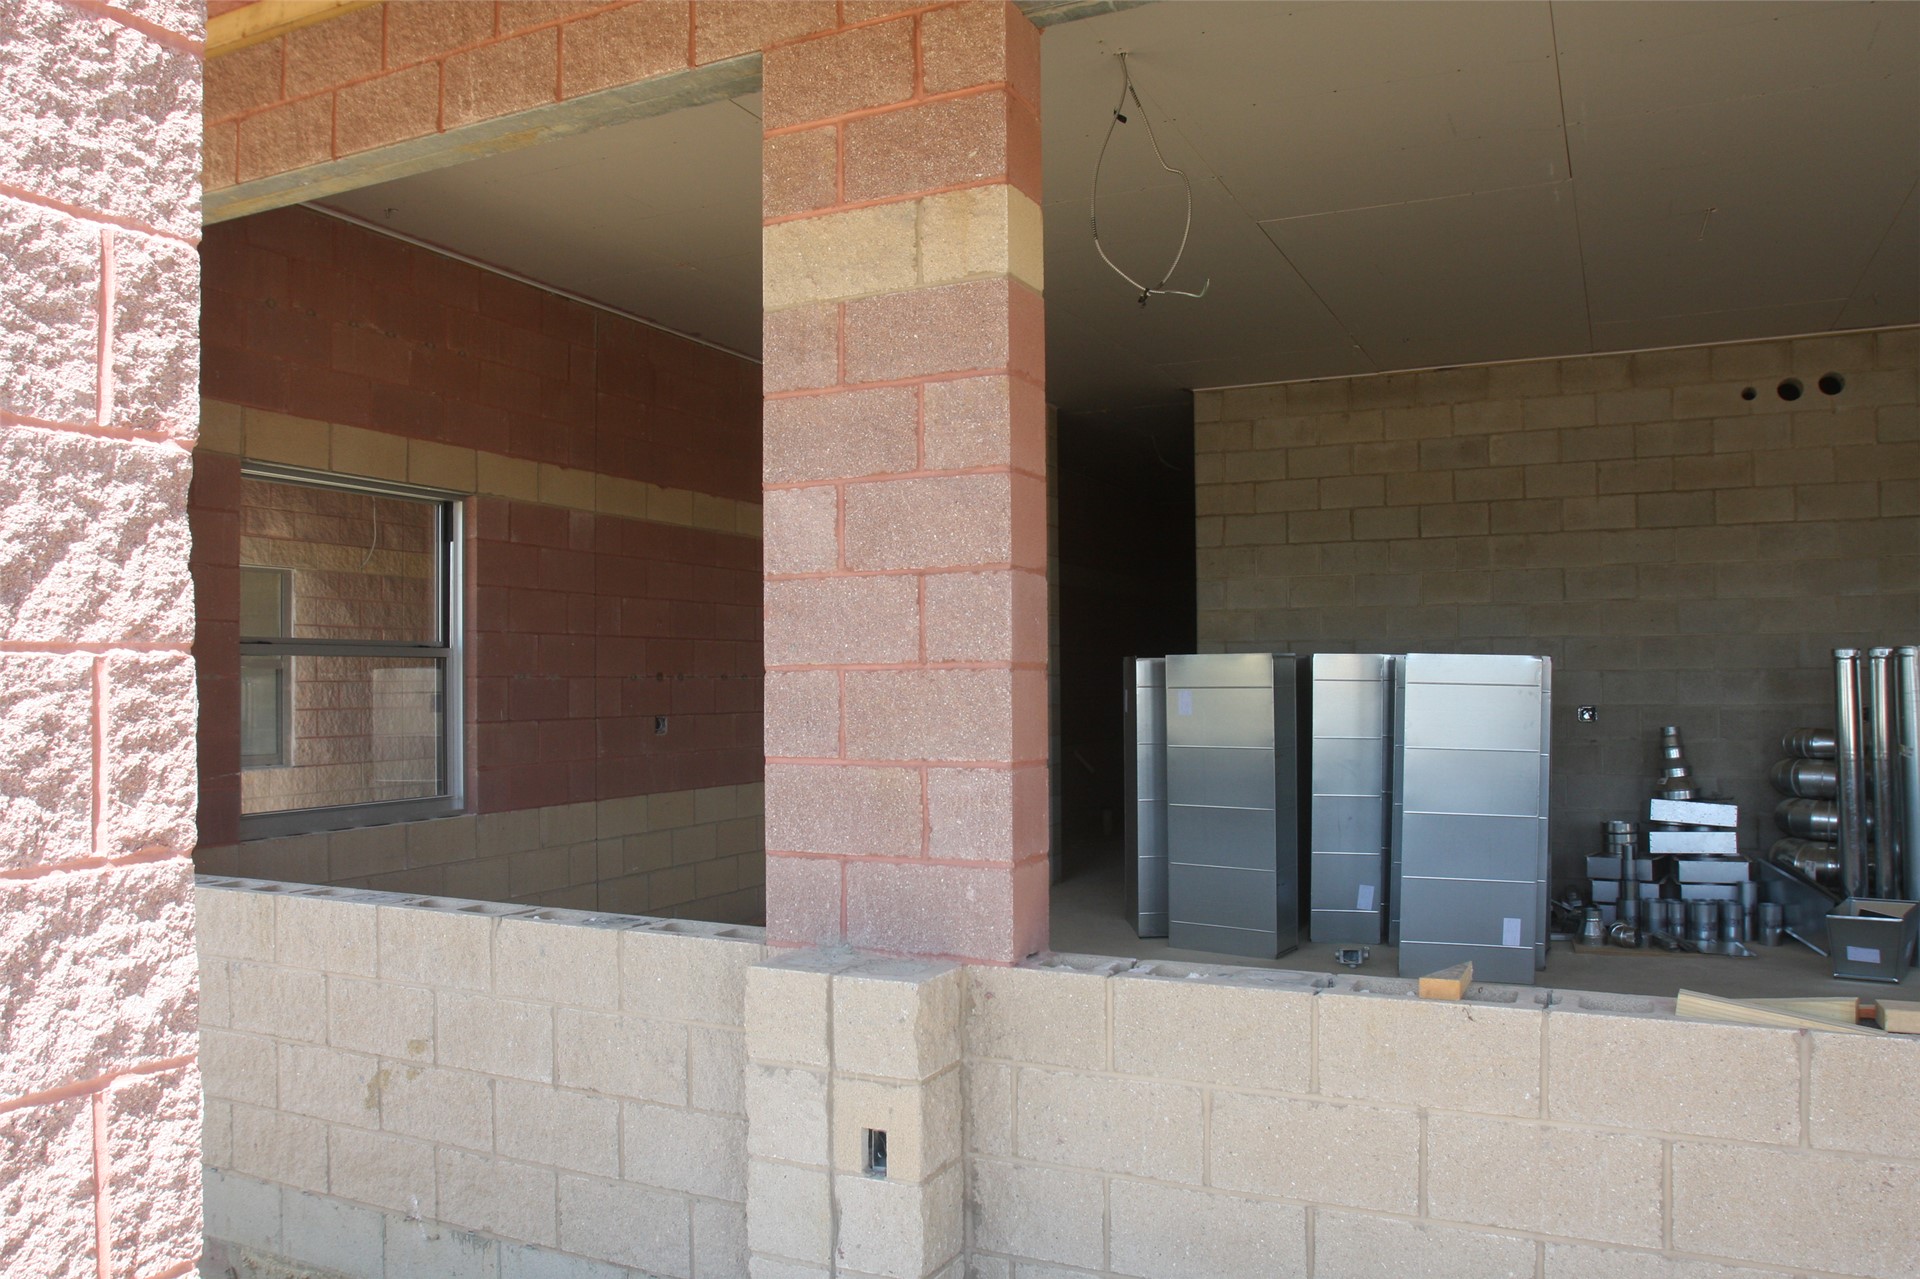 The west window of the concession stand